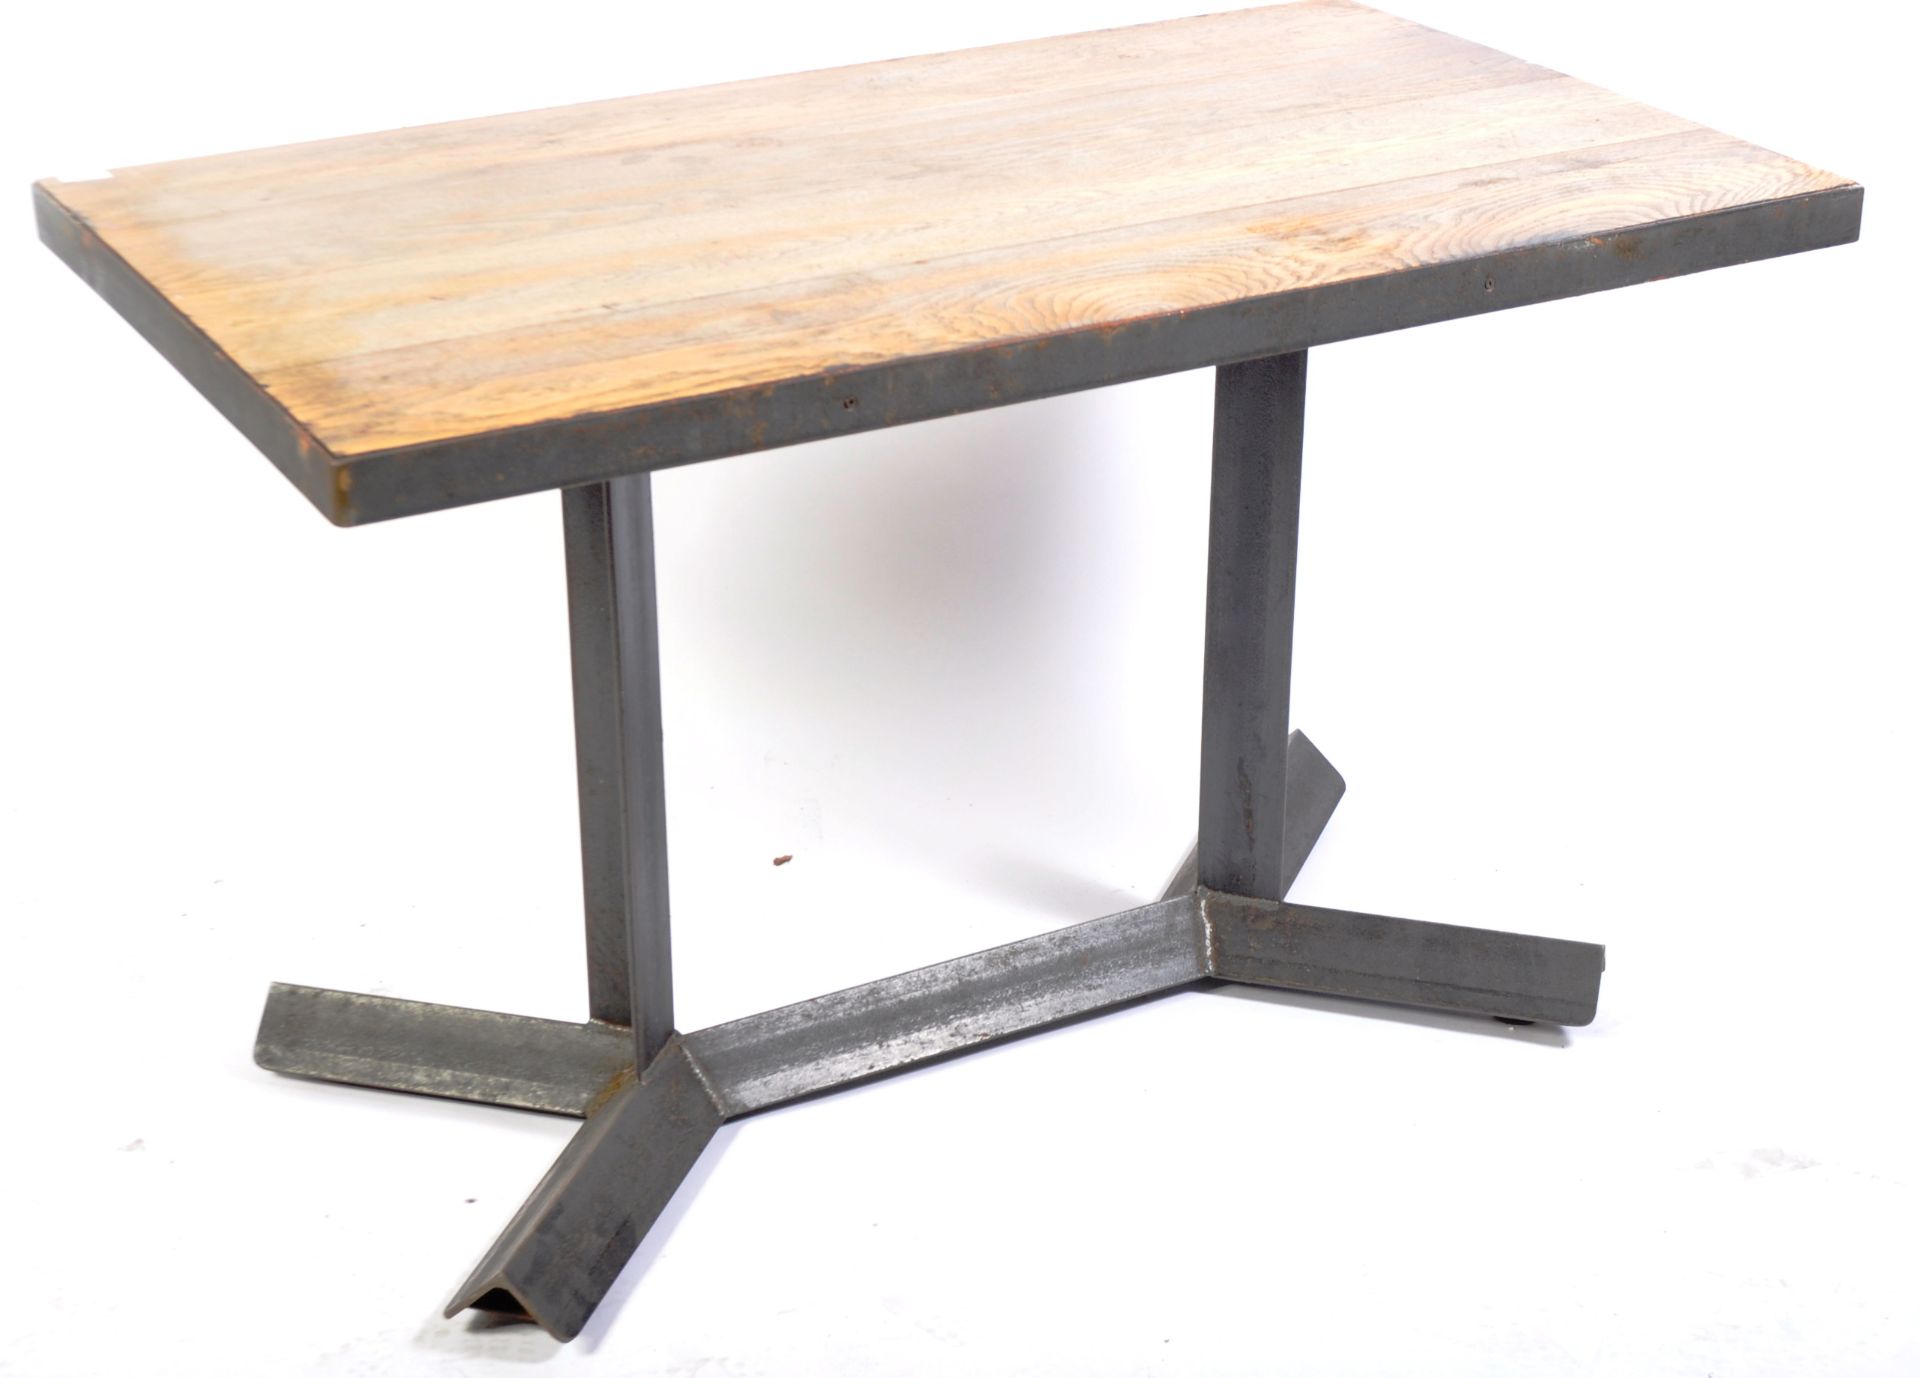 CONTEMPORARY INDUSTRIAL METAL FRAMED DINING TABLE - Image 2 of 4